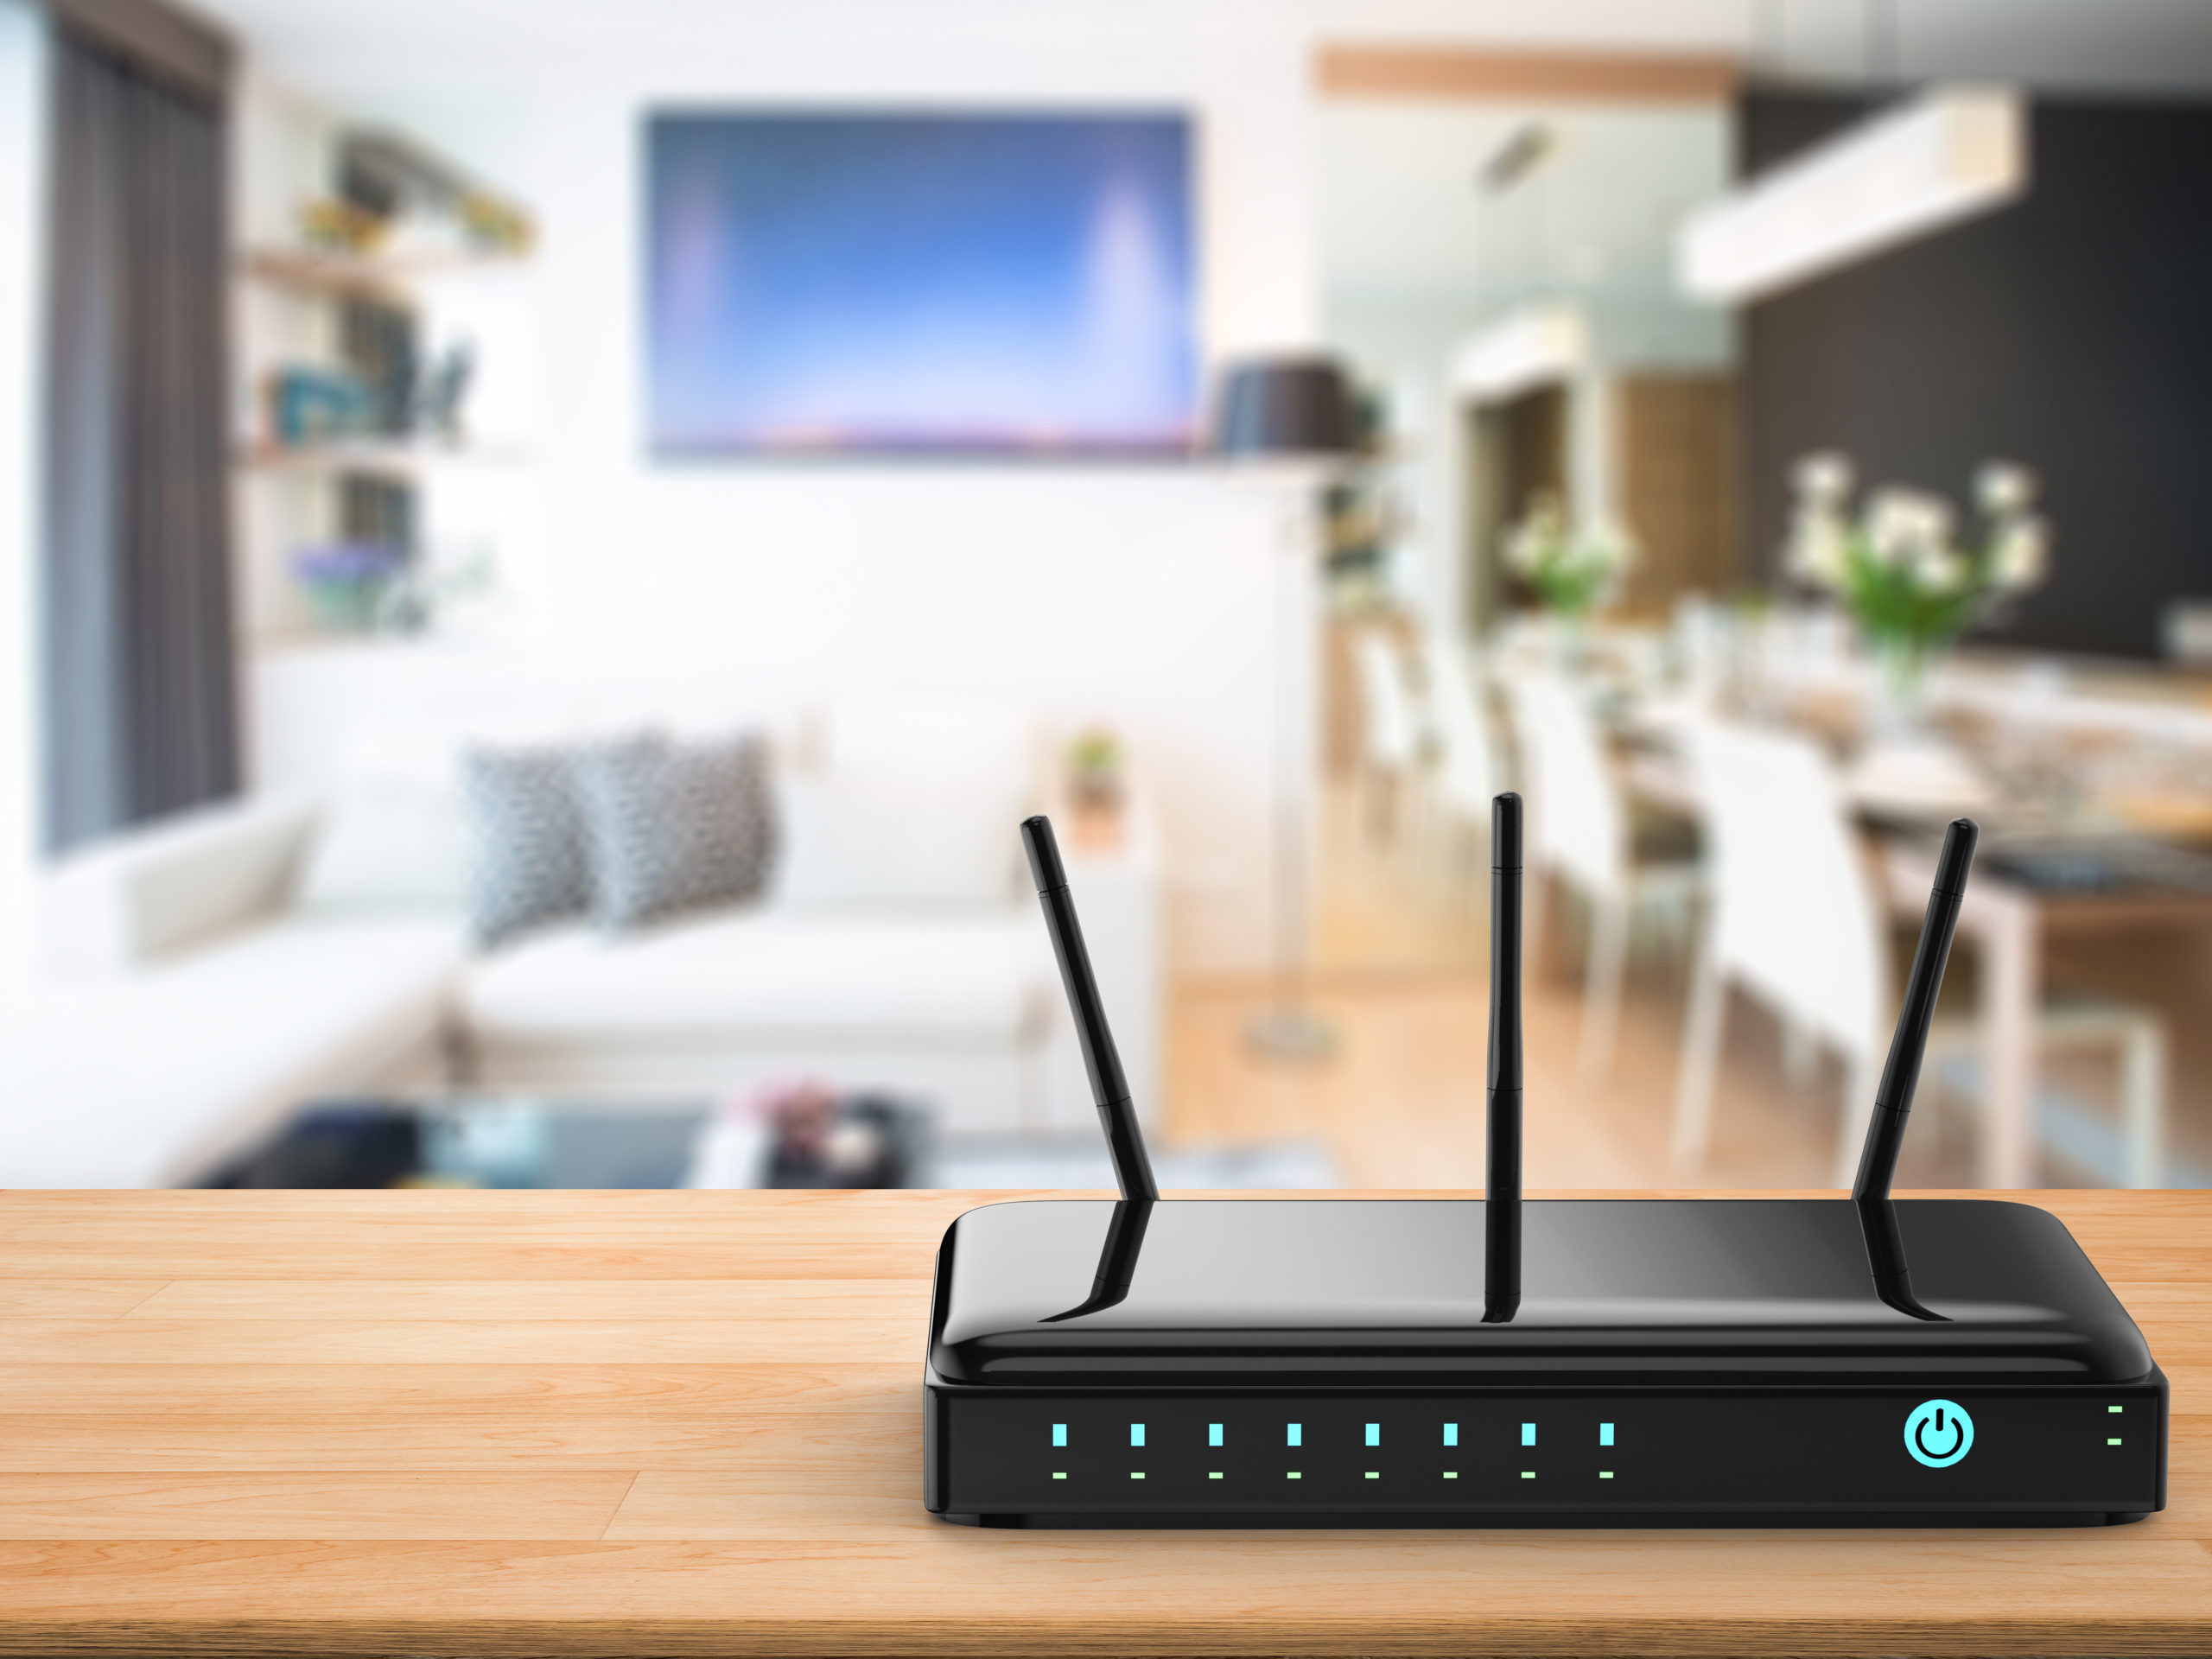 Wi-Fi router on table with TV in background